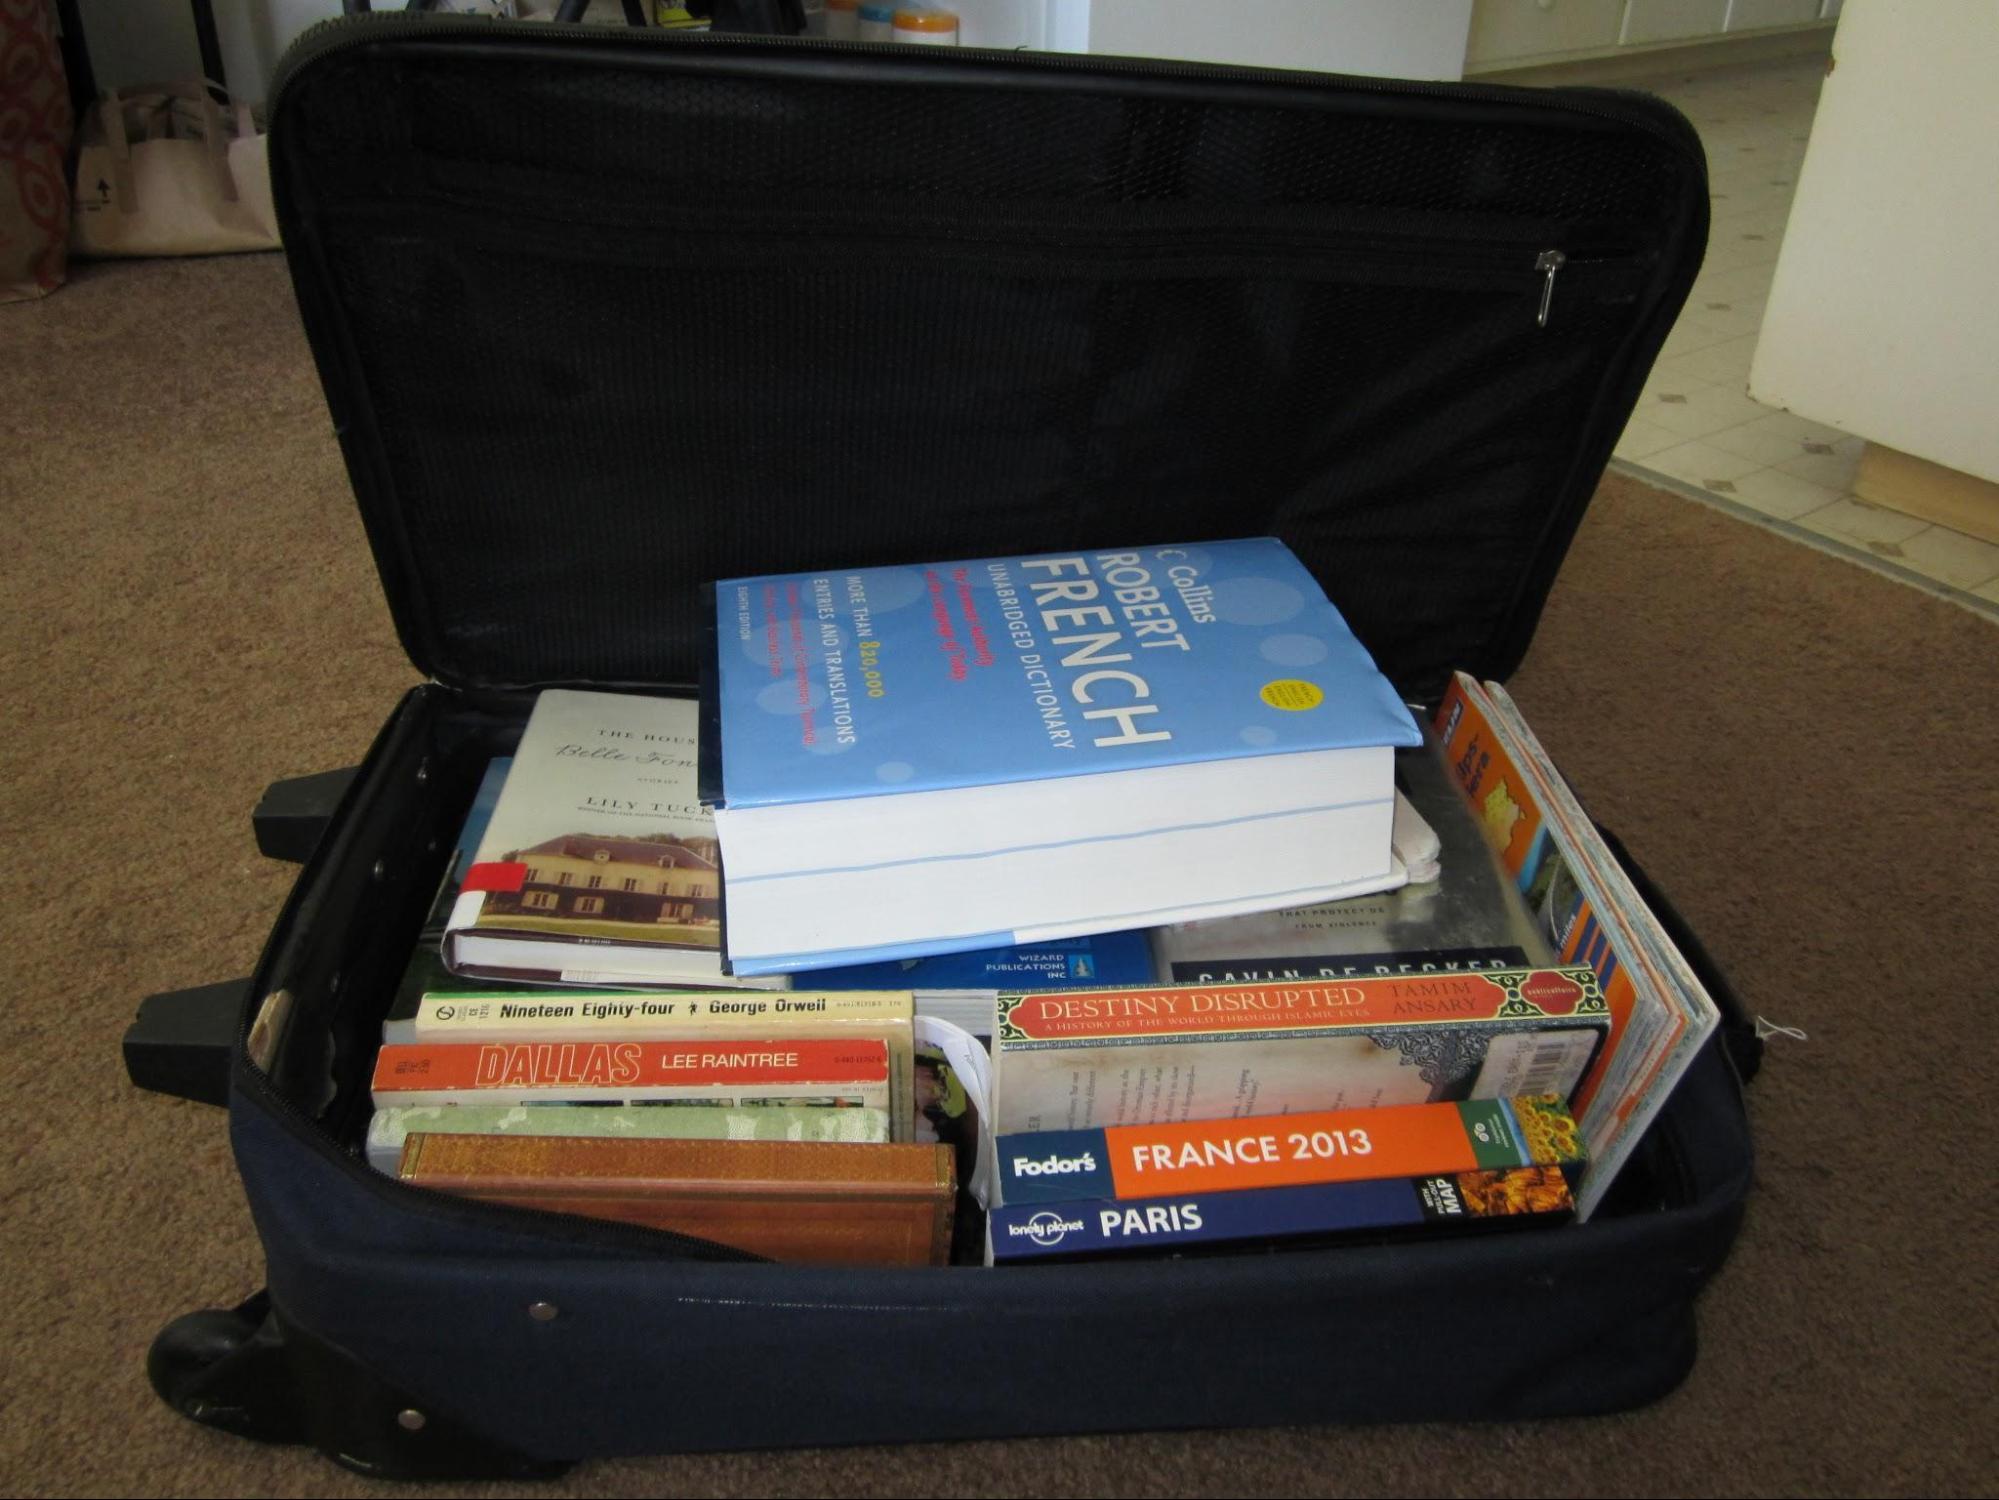 packing books